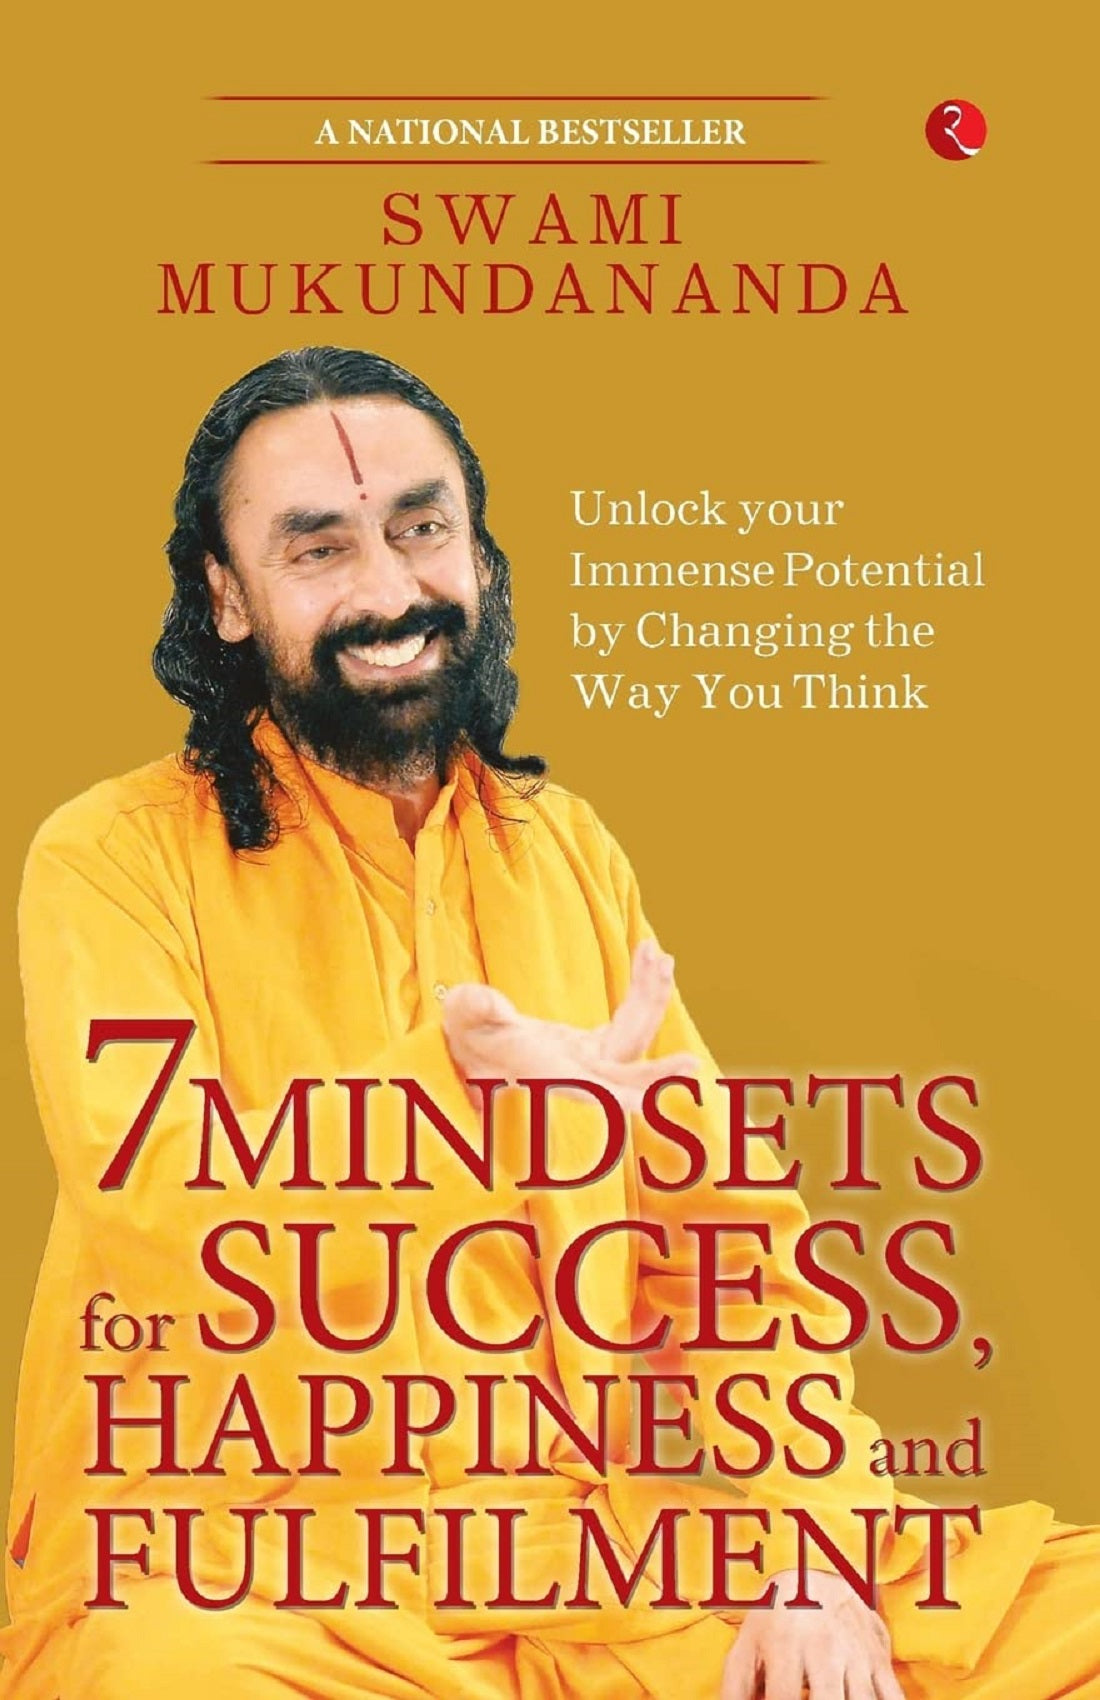 7 MINDSETS FOR SUCCESS, HAPPINESS AND FULFILMENT